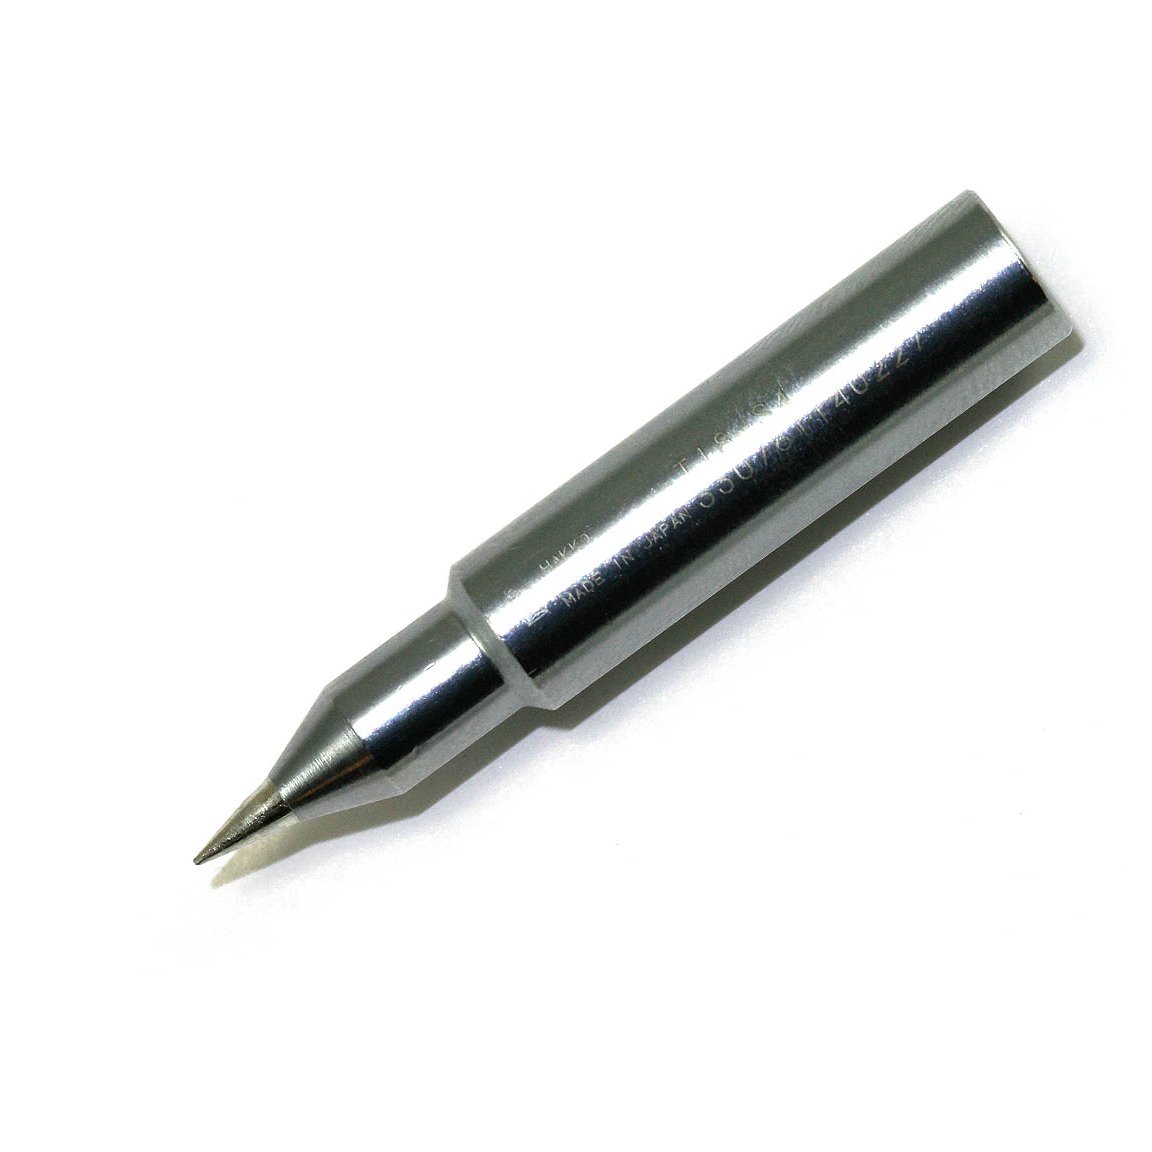 Hakko T18 Series Tips New .125 mm Pointed T18-S4